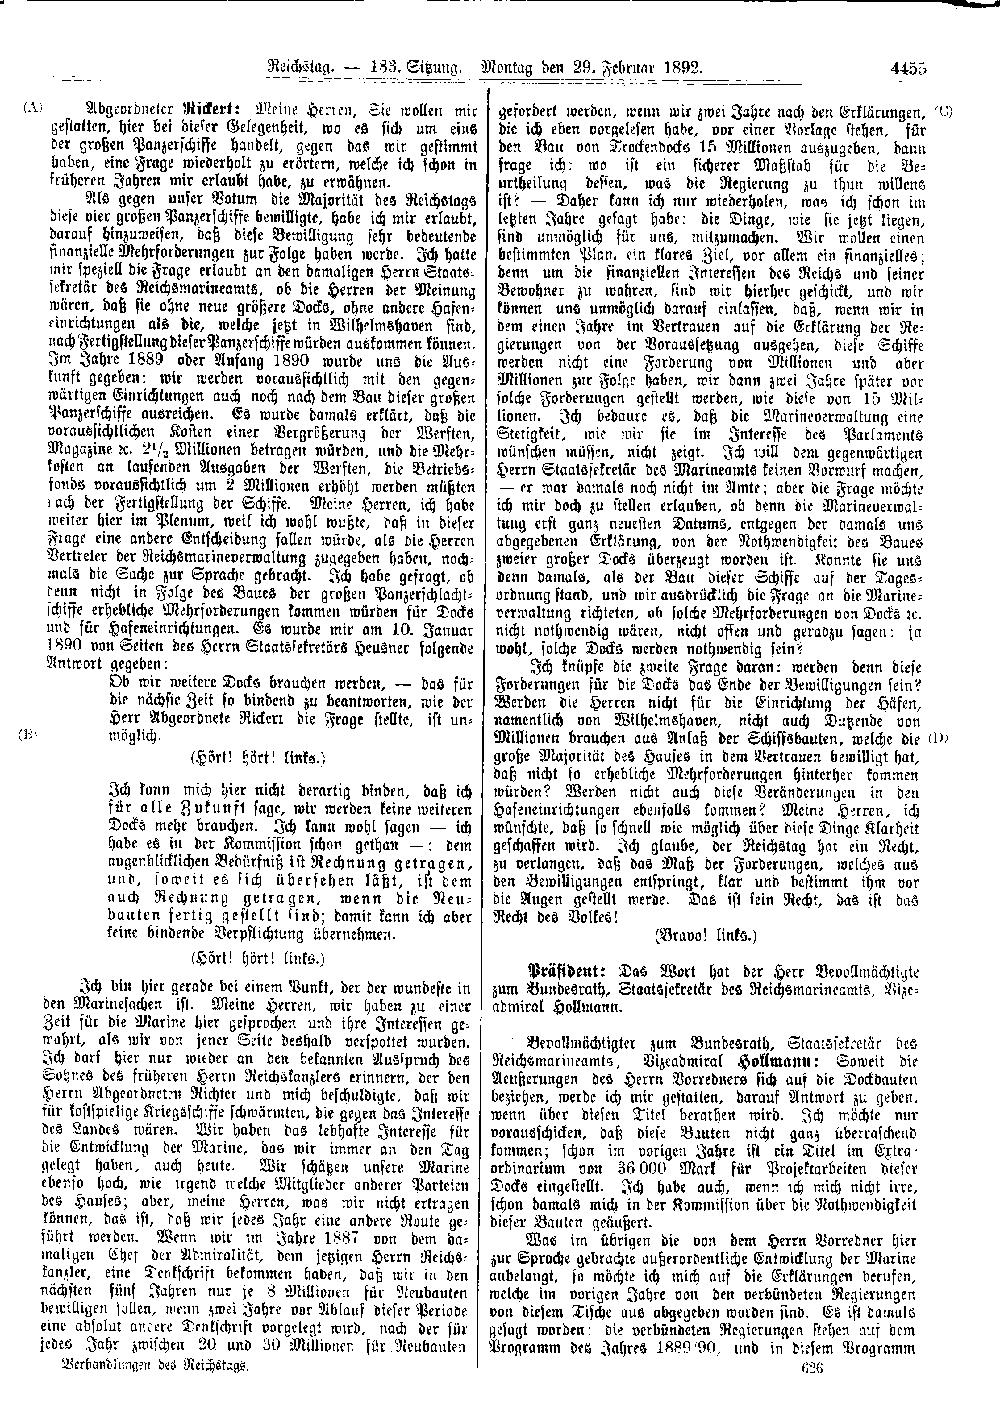 Scan of page 4455